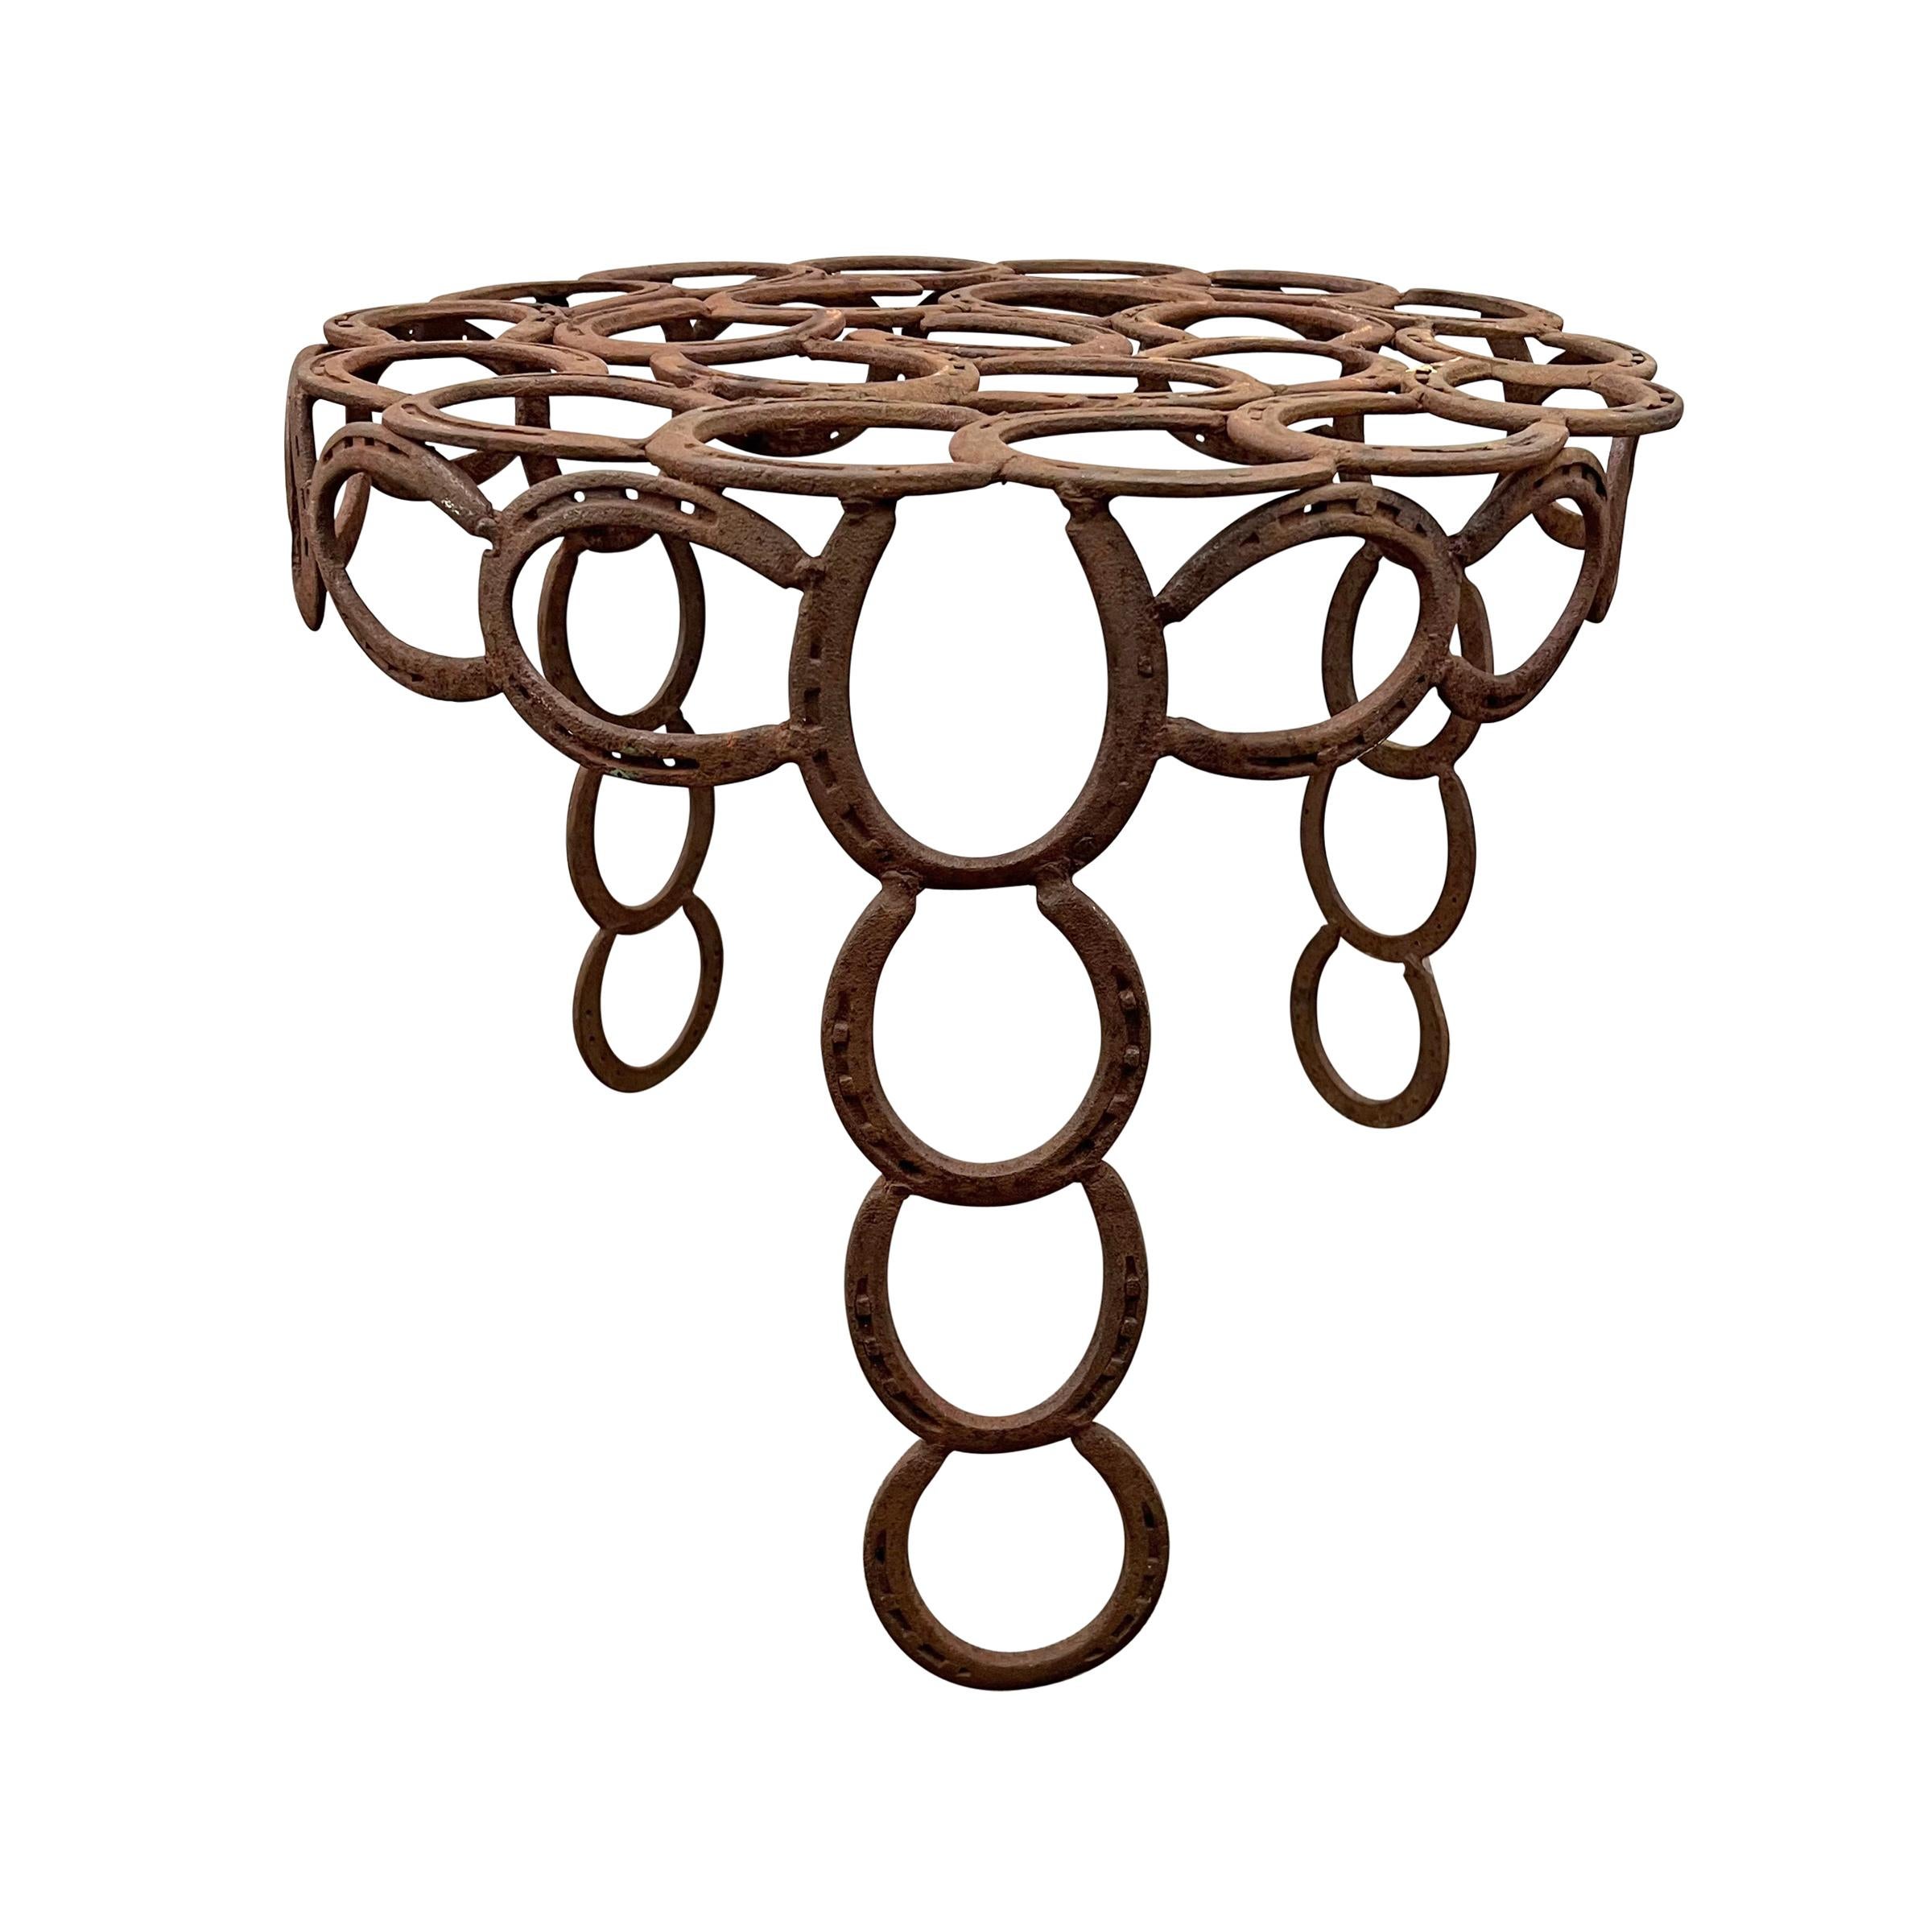 Hand-Crafted Vintage Iron Horseshoe Side Table For Sale